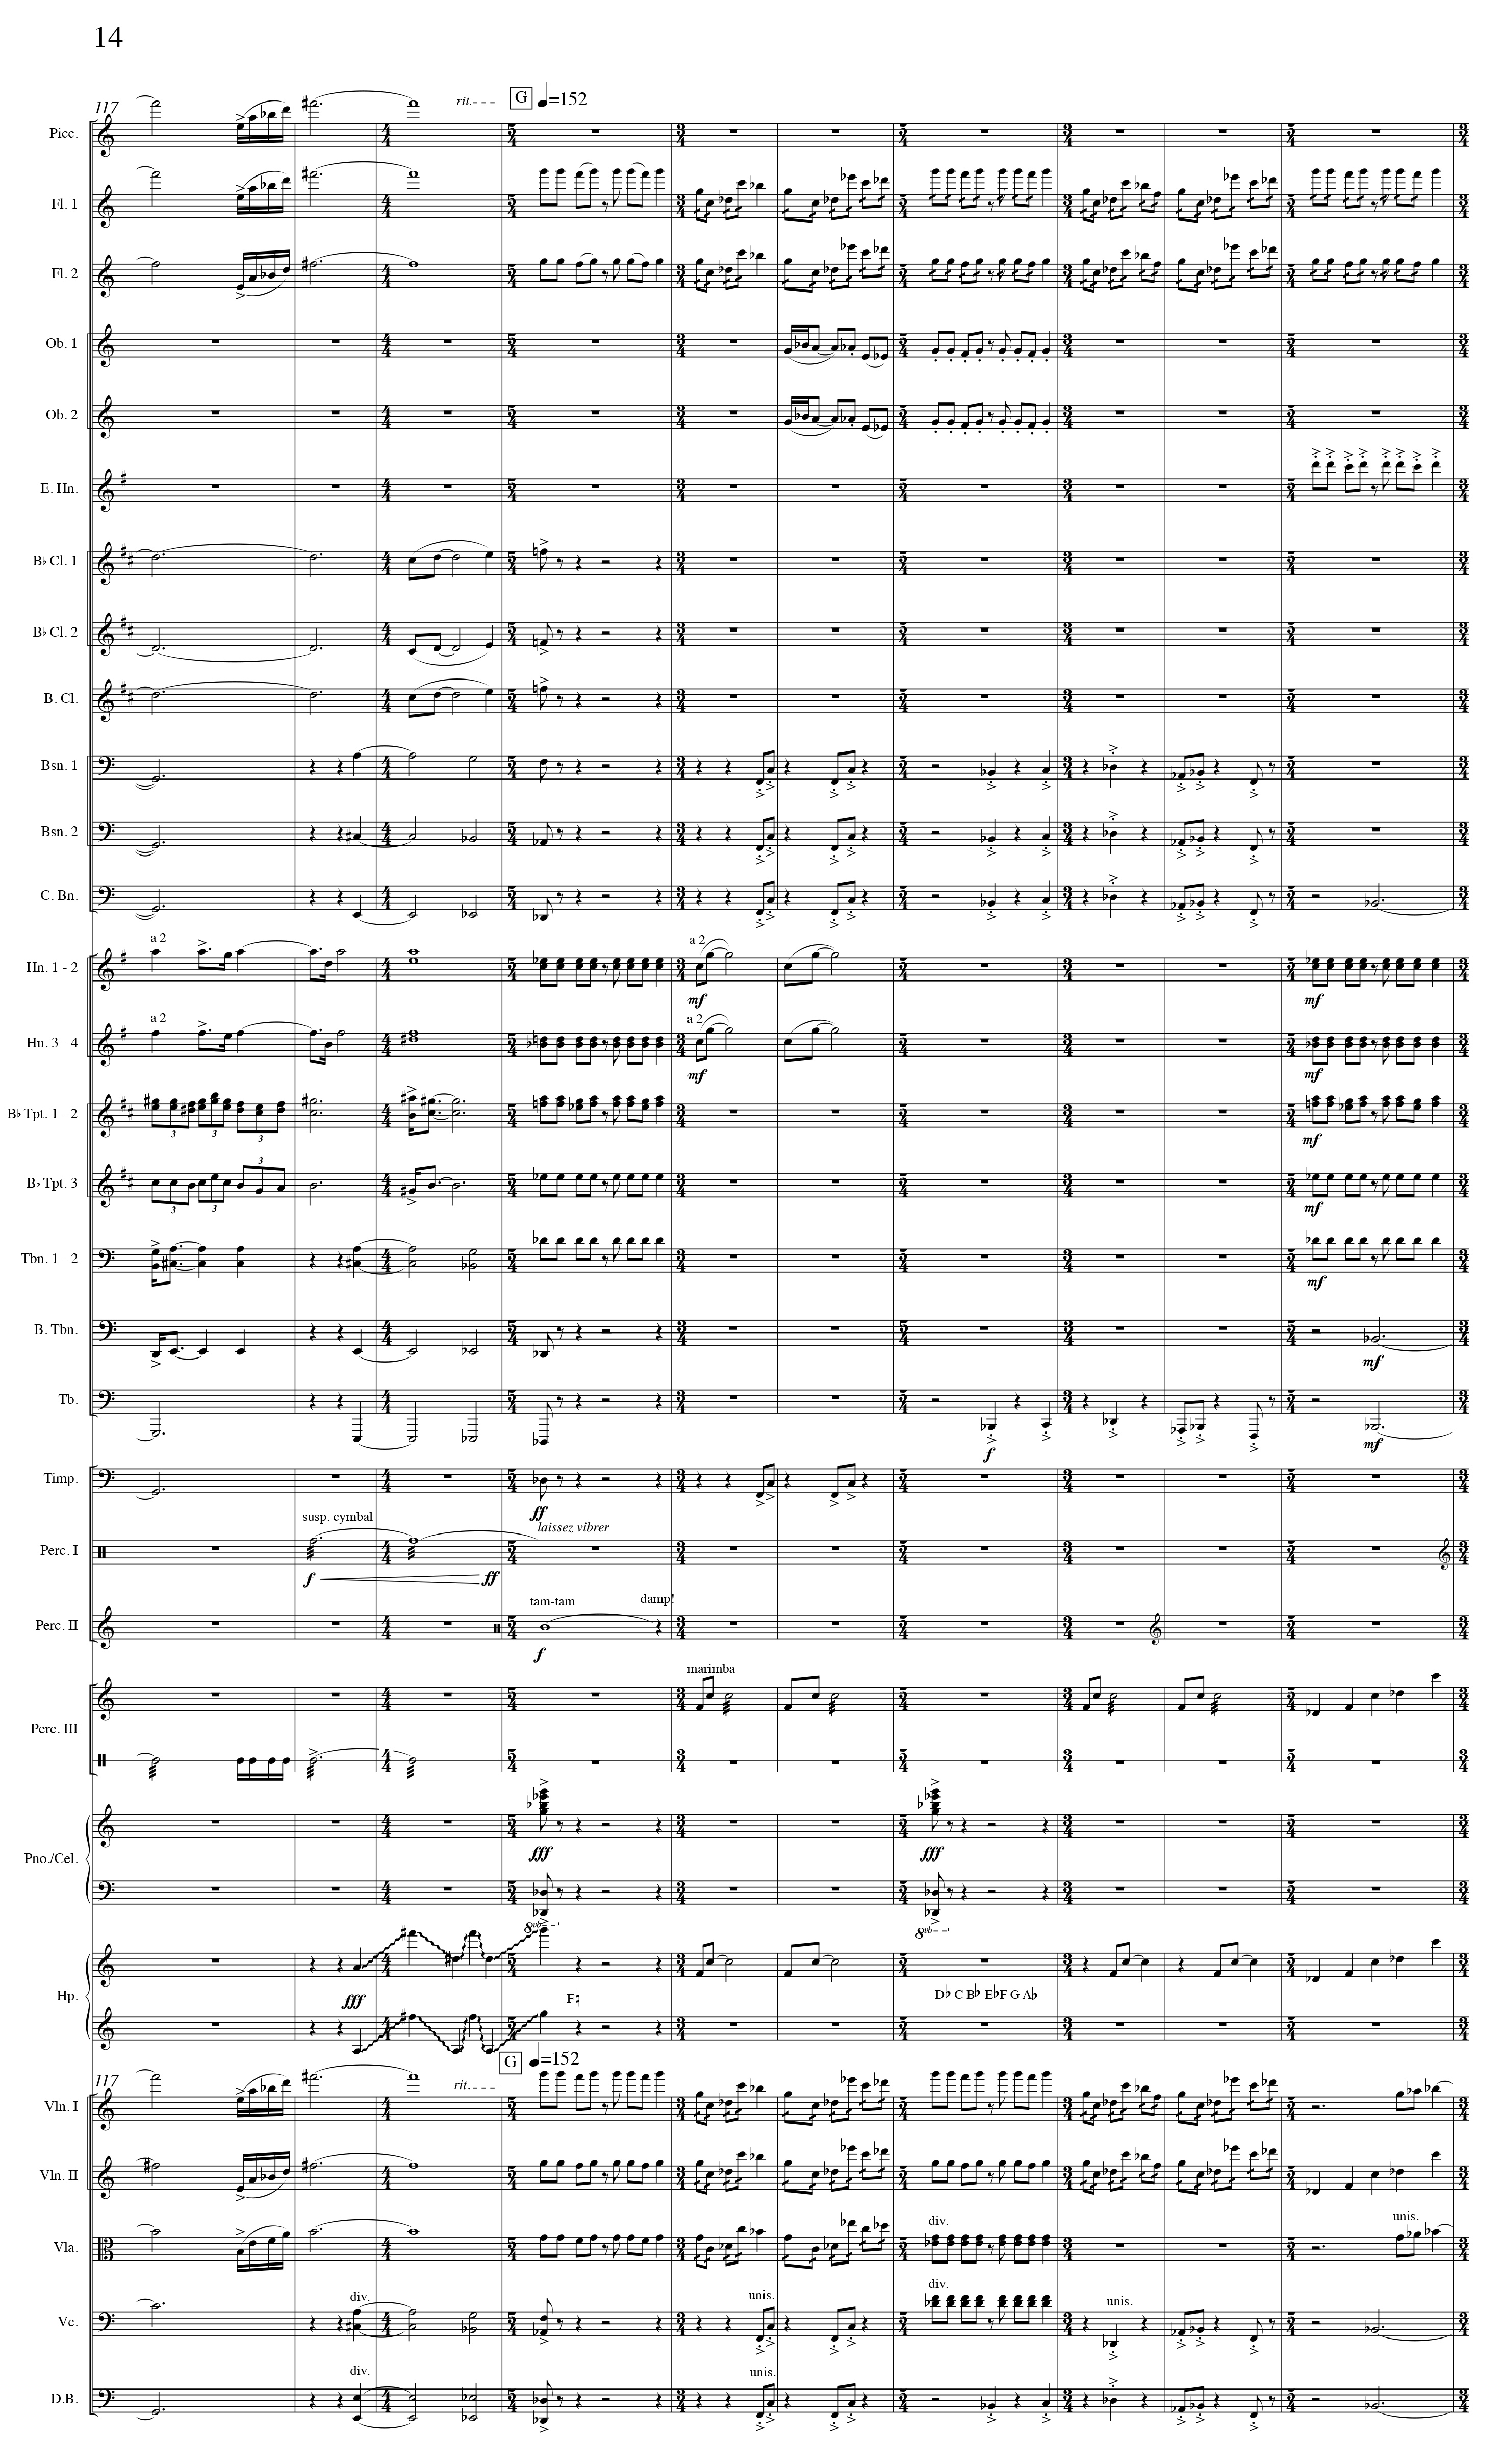 Score sample from Sukkot Through Orion’s Nebula by James Lee III